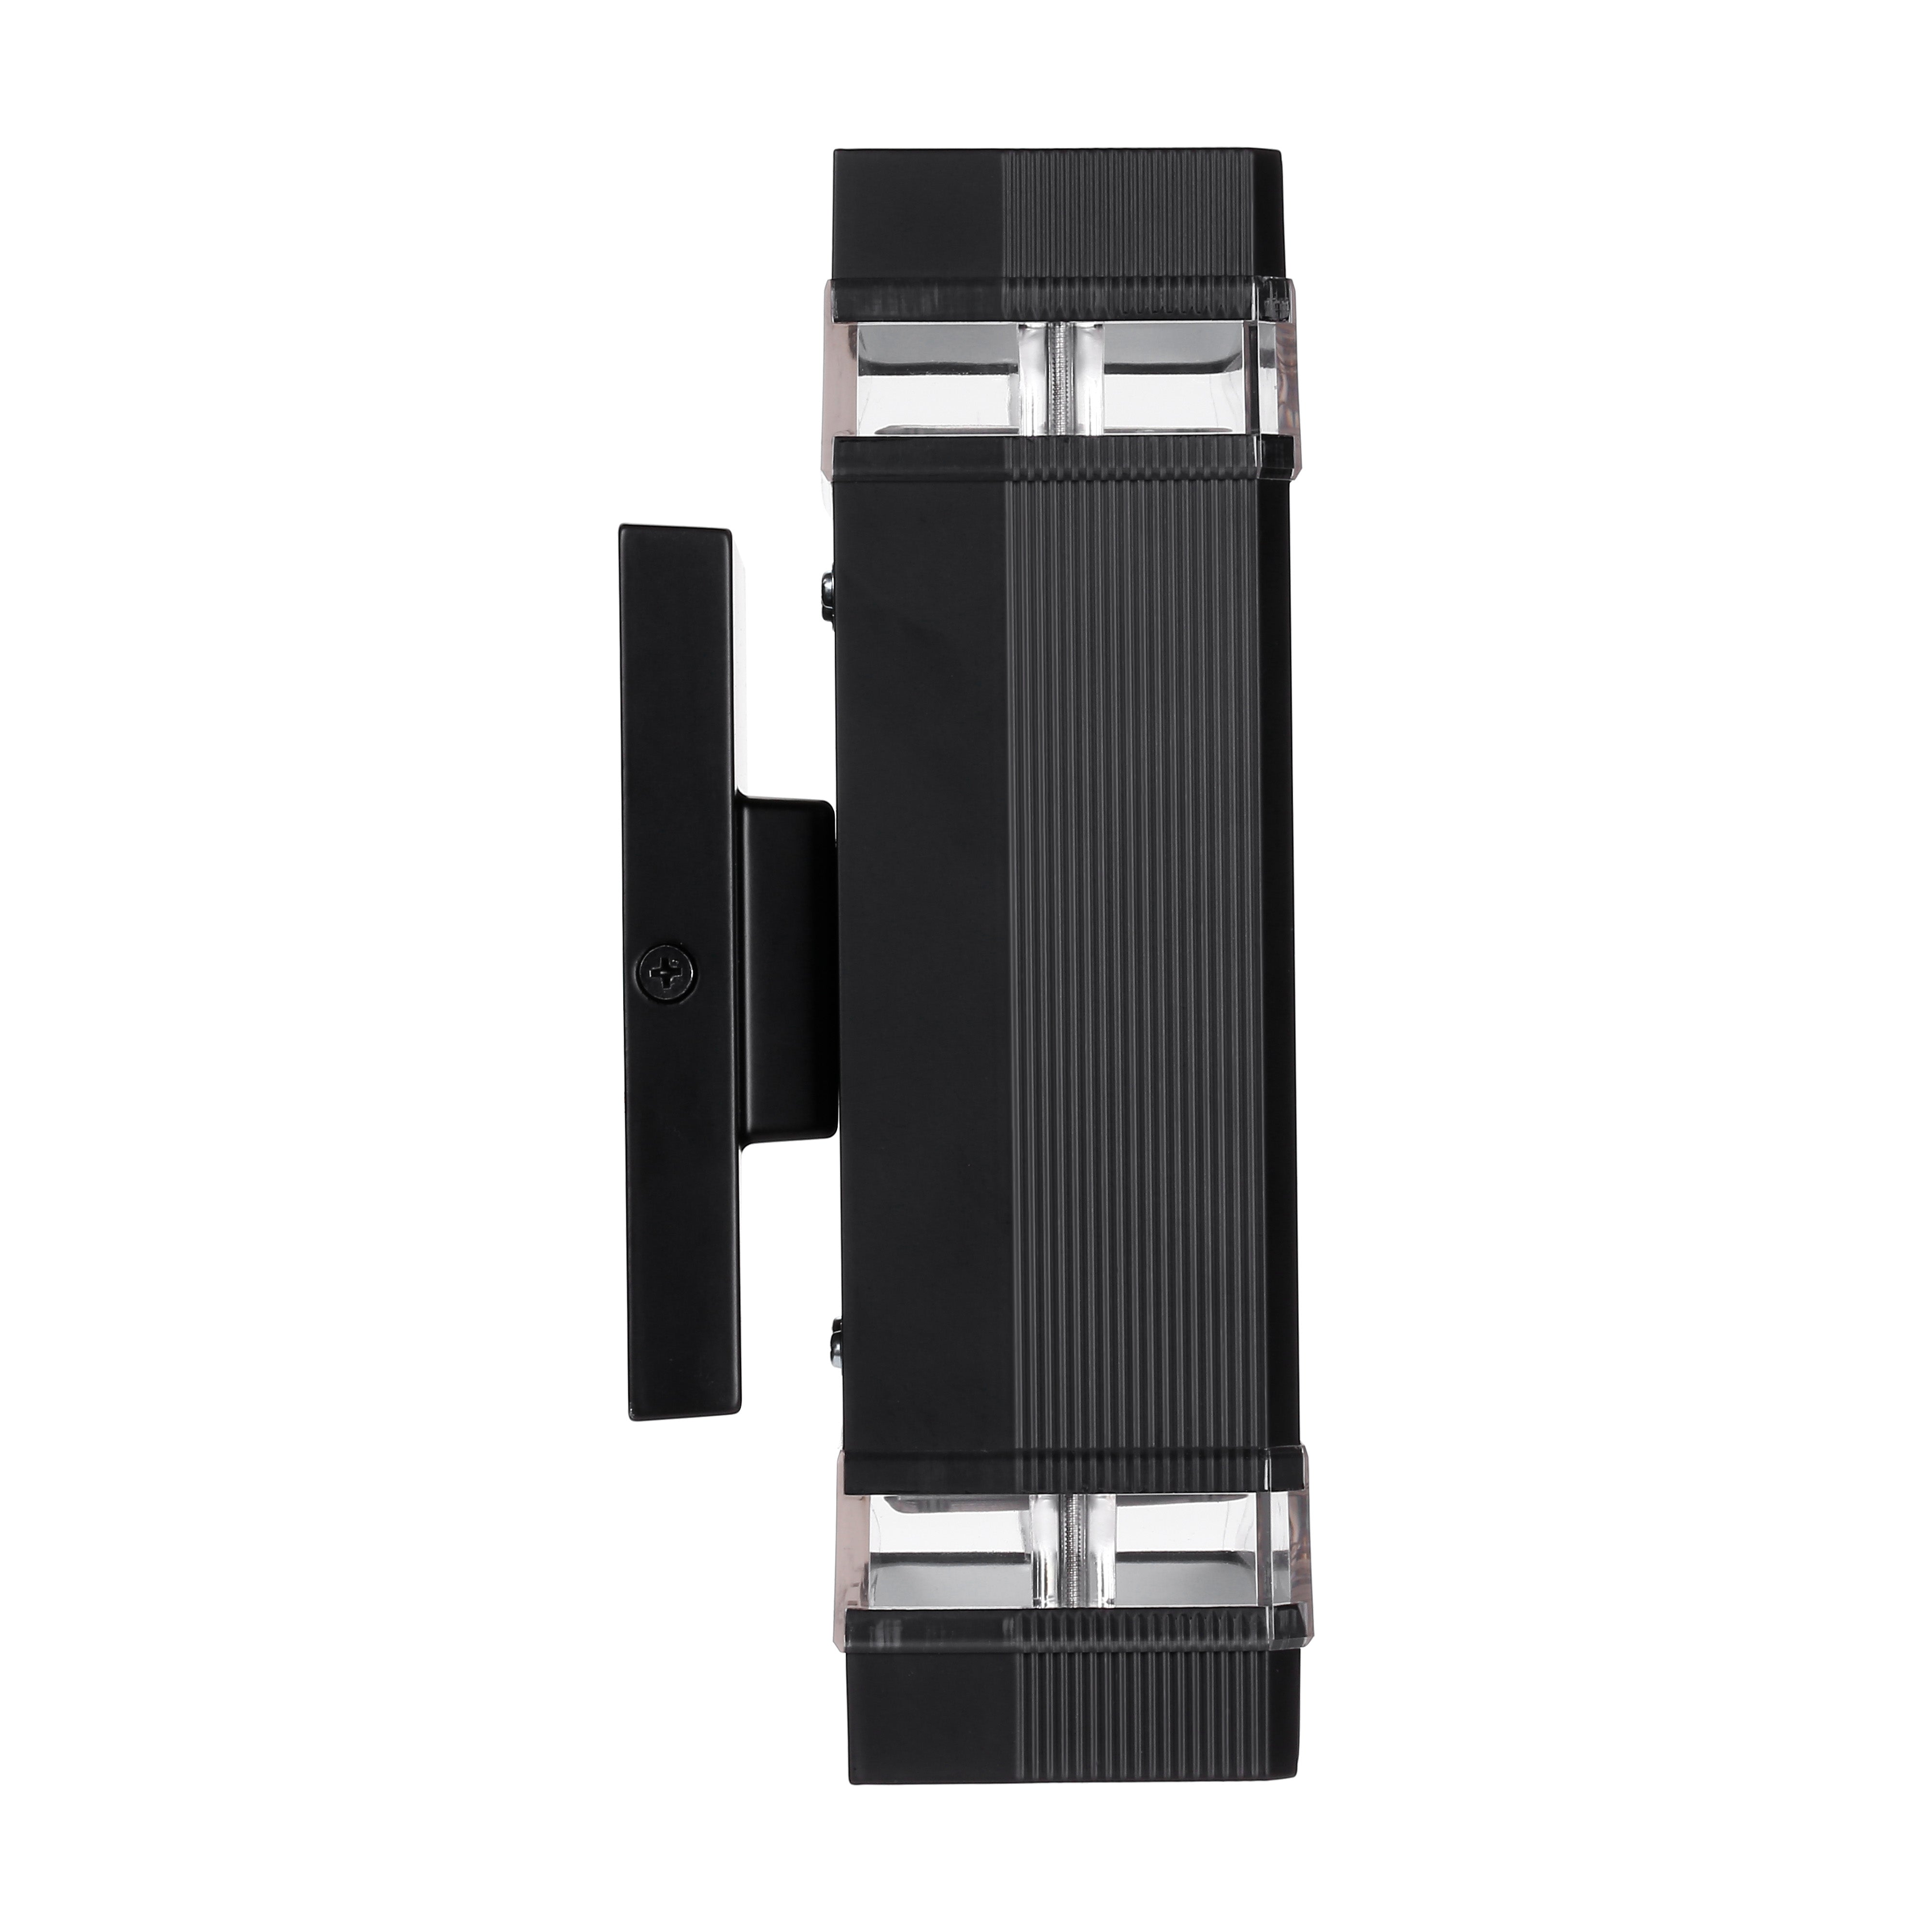 The Colony 20W Outdoor Wall Sconce